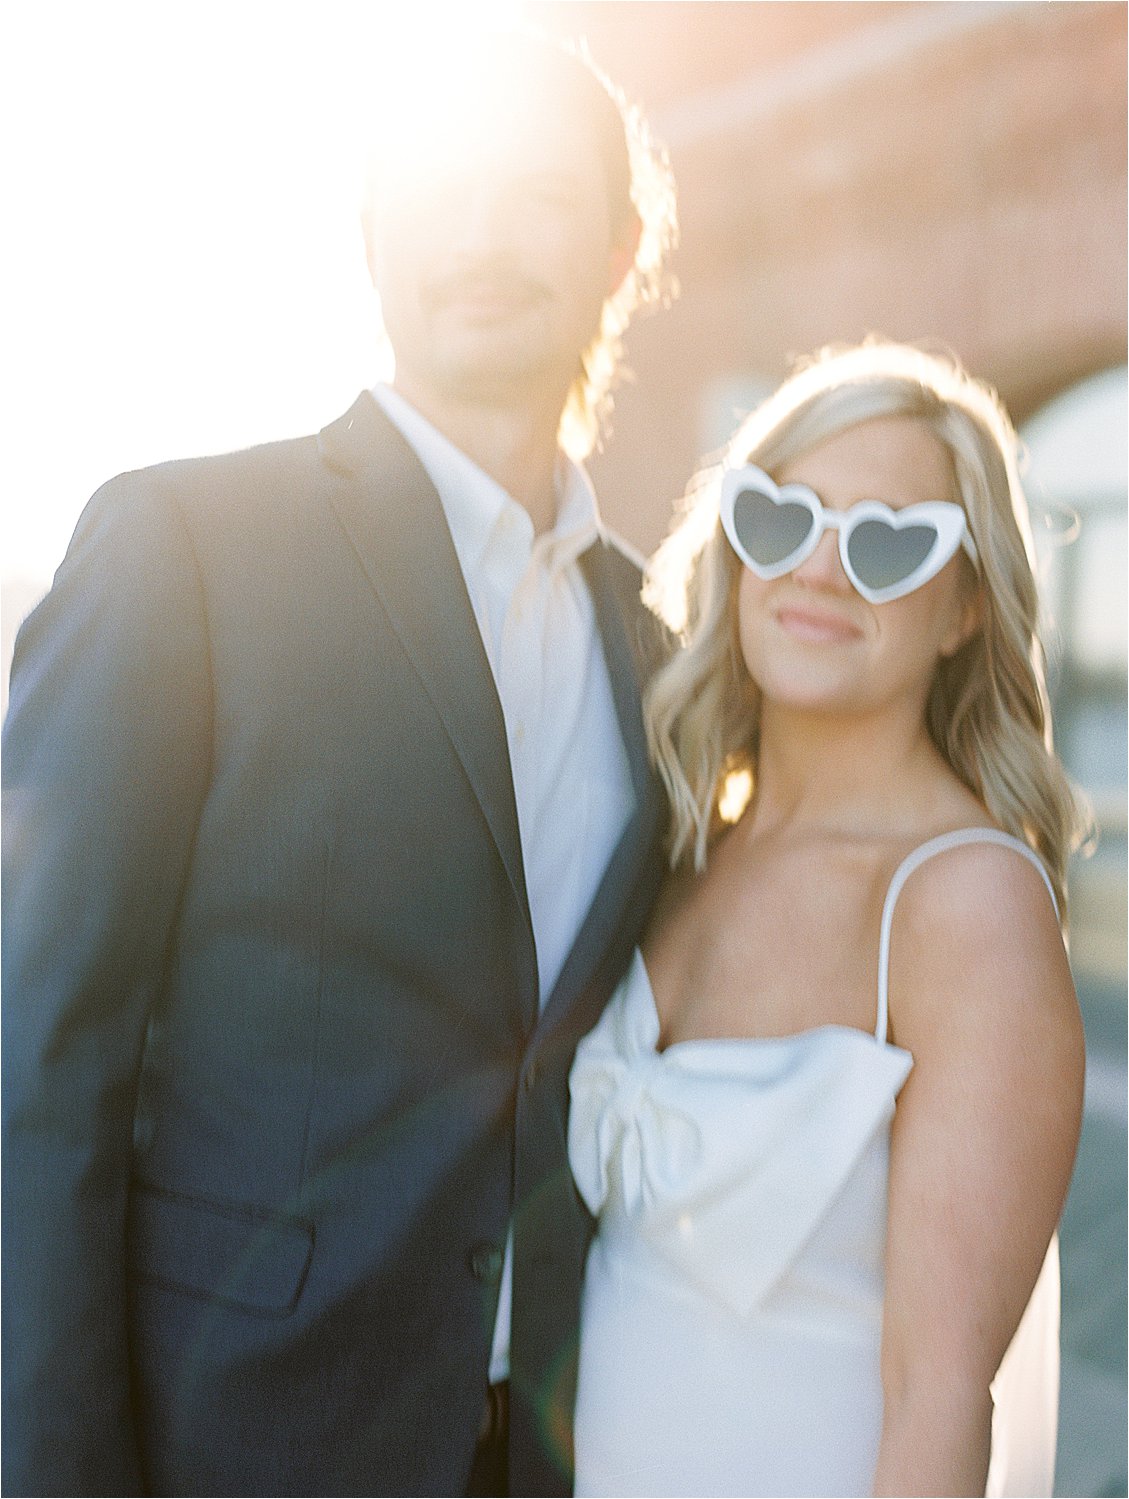 Golden hour engagement session in Fells Point with film wedding photographer, Renee Hollingshead. Bride is wearing white heart sunglasses